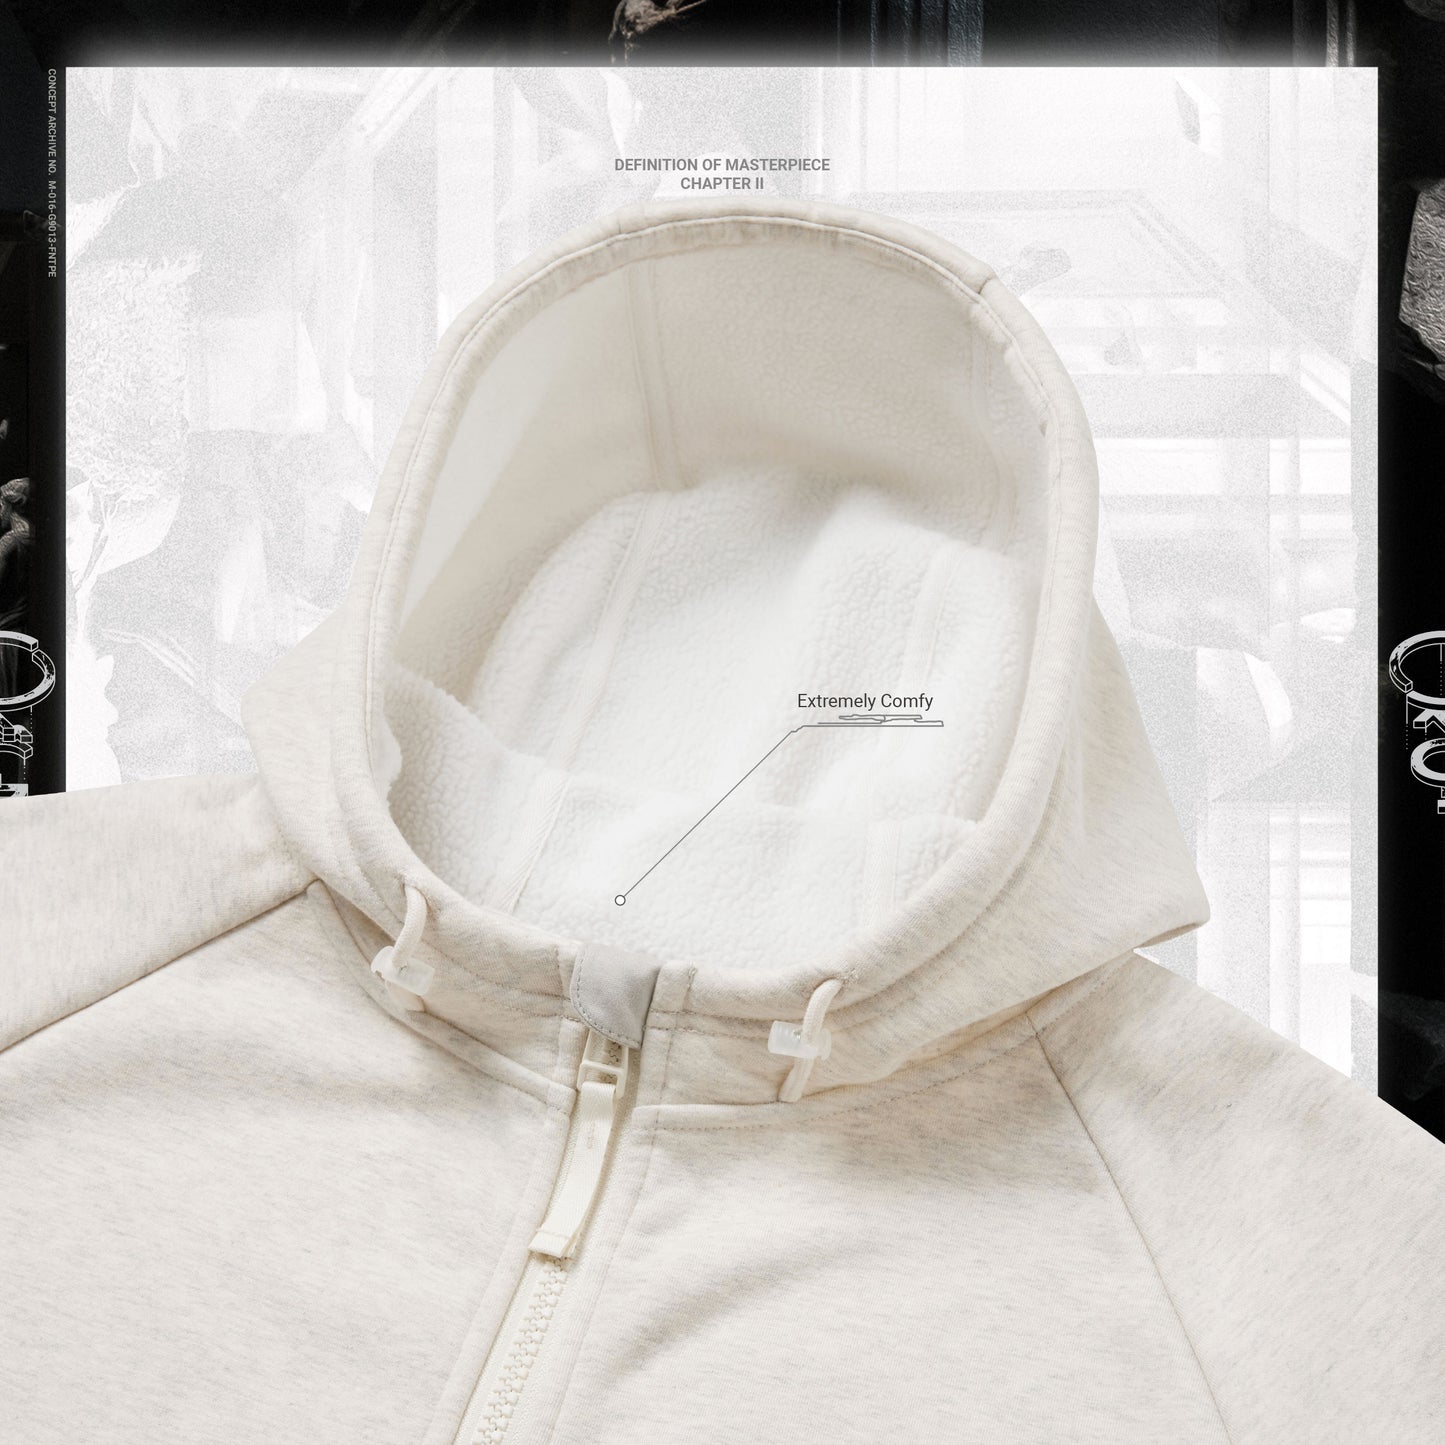 【GOOPiMADE x master-piece 】 “MEquip-H3“ Mantle Logo Hooded Sweat Jacket IVORY